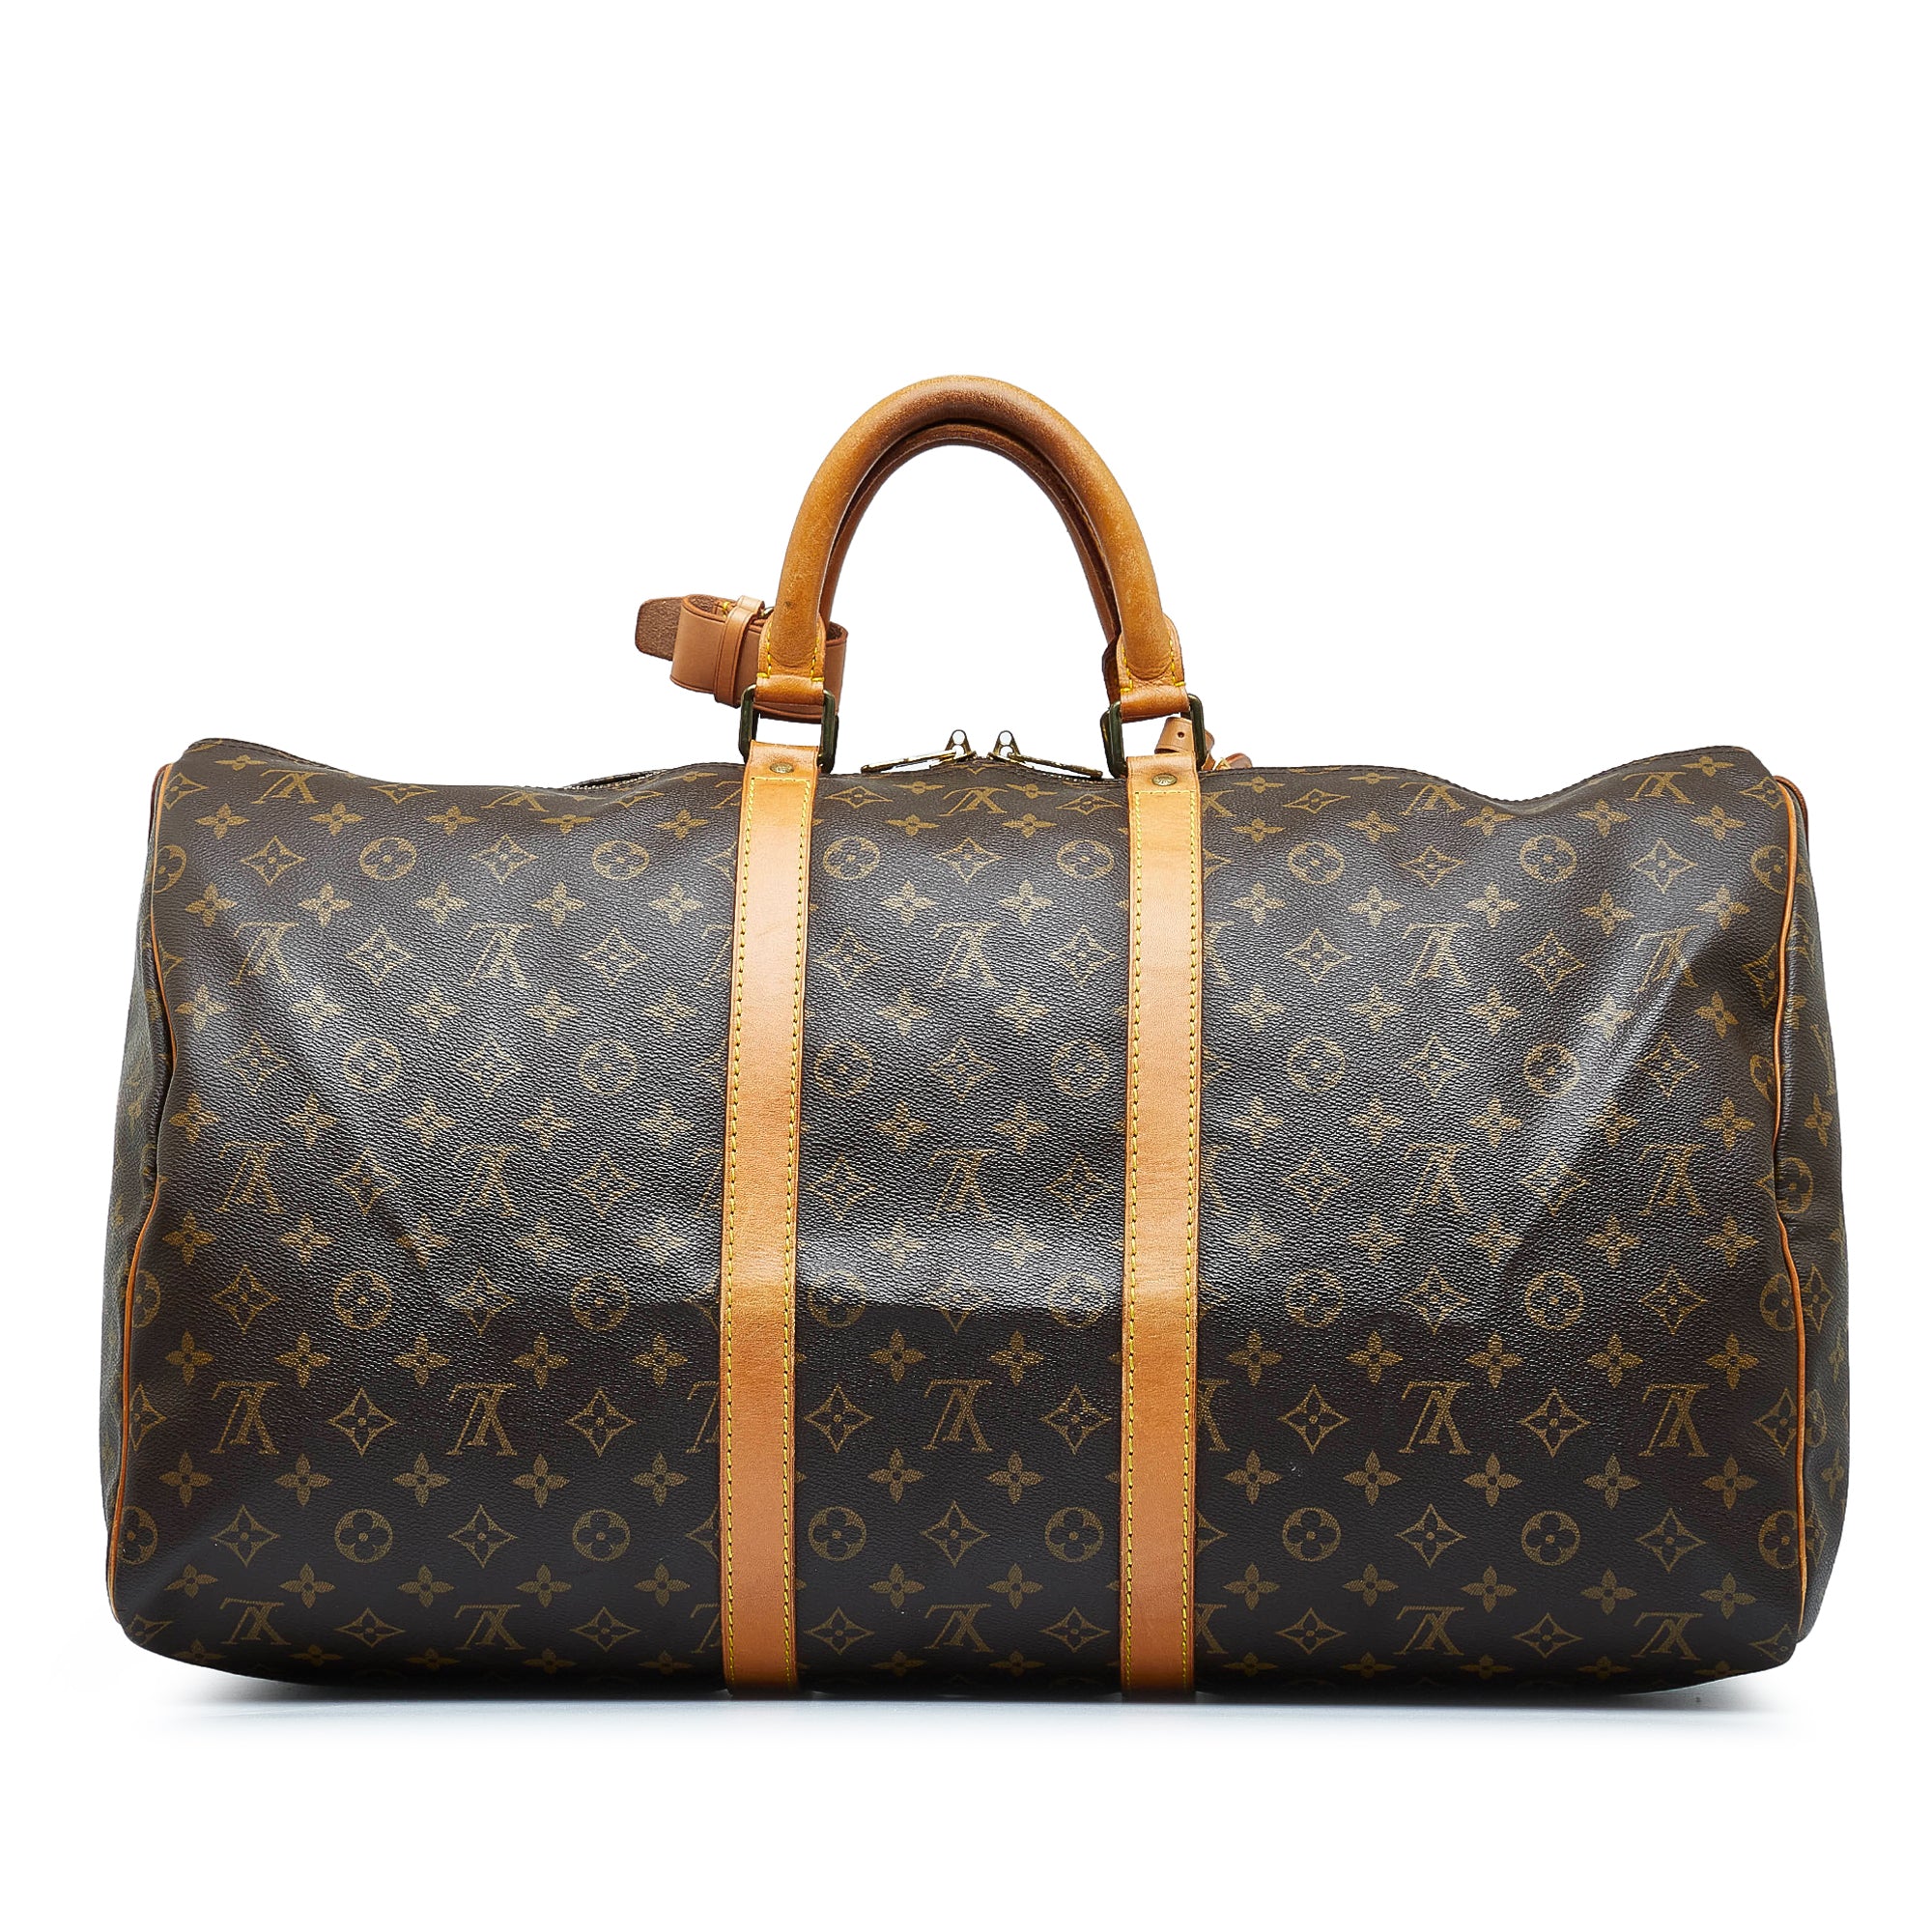 Keepall Louis Vuitton (version in Monogram canvas) and Moschino gloves!